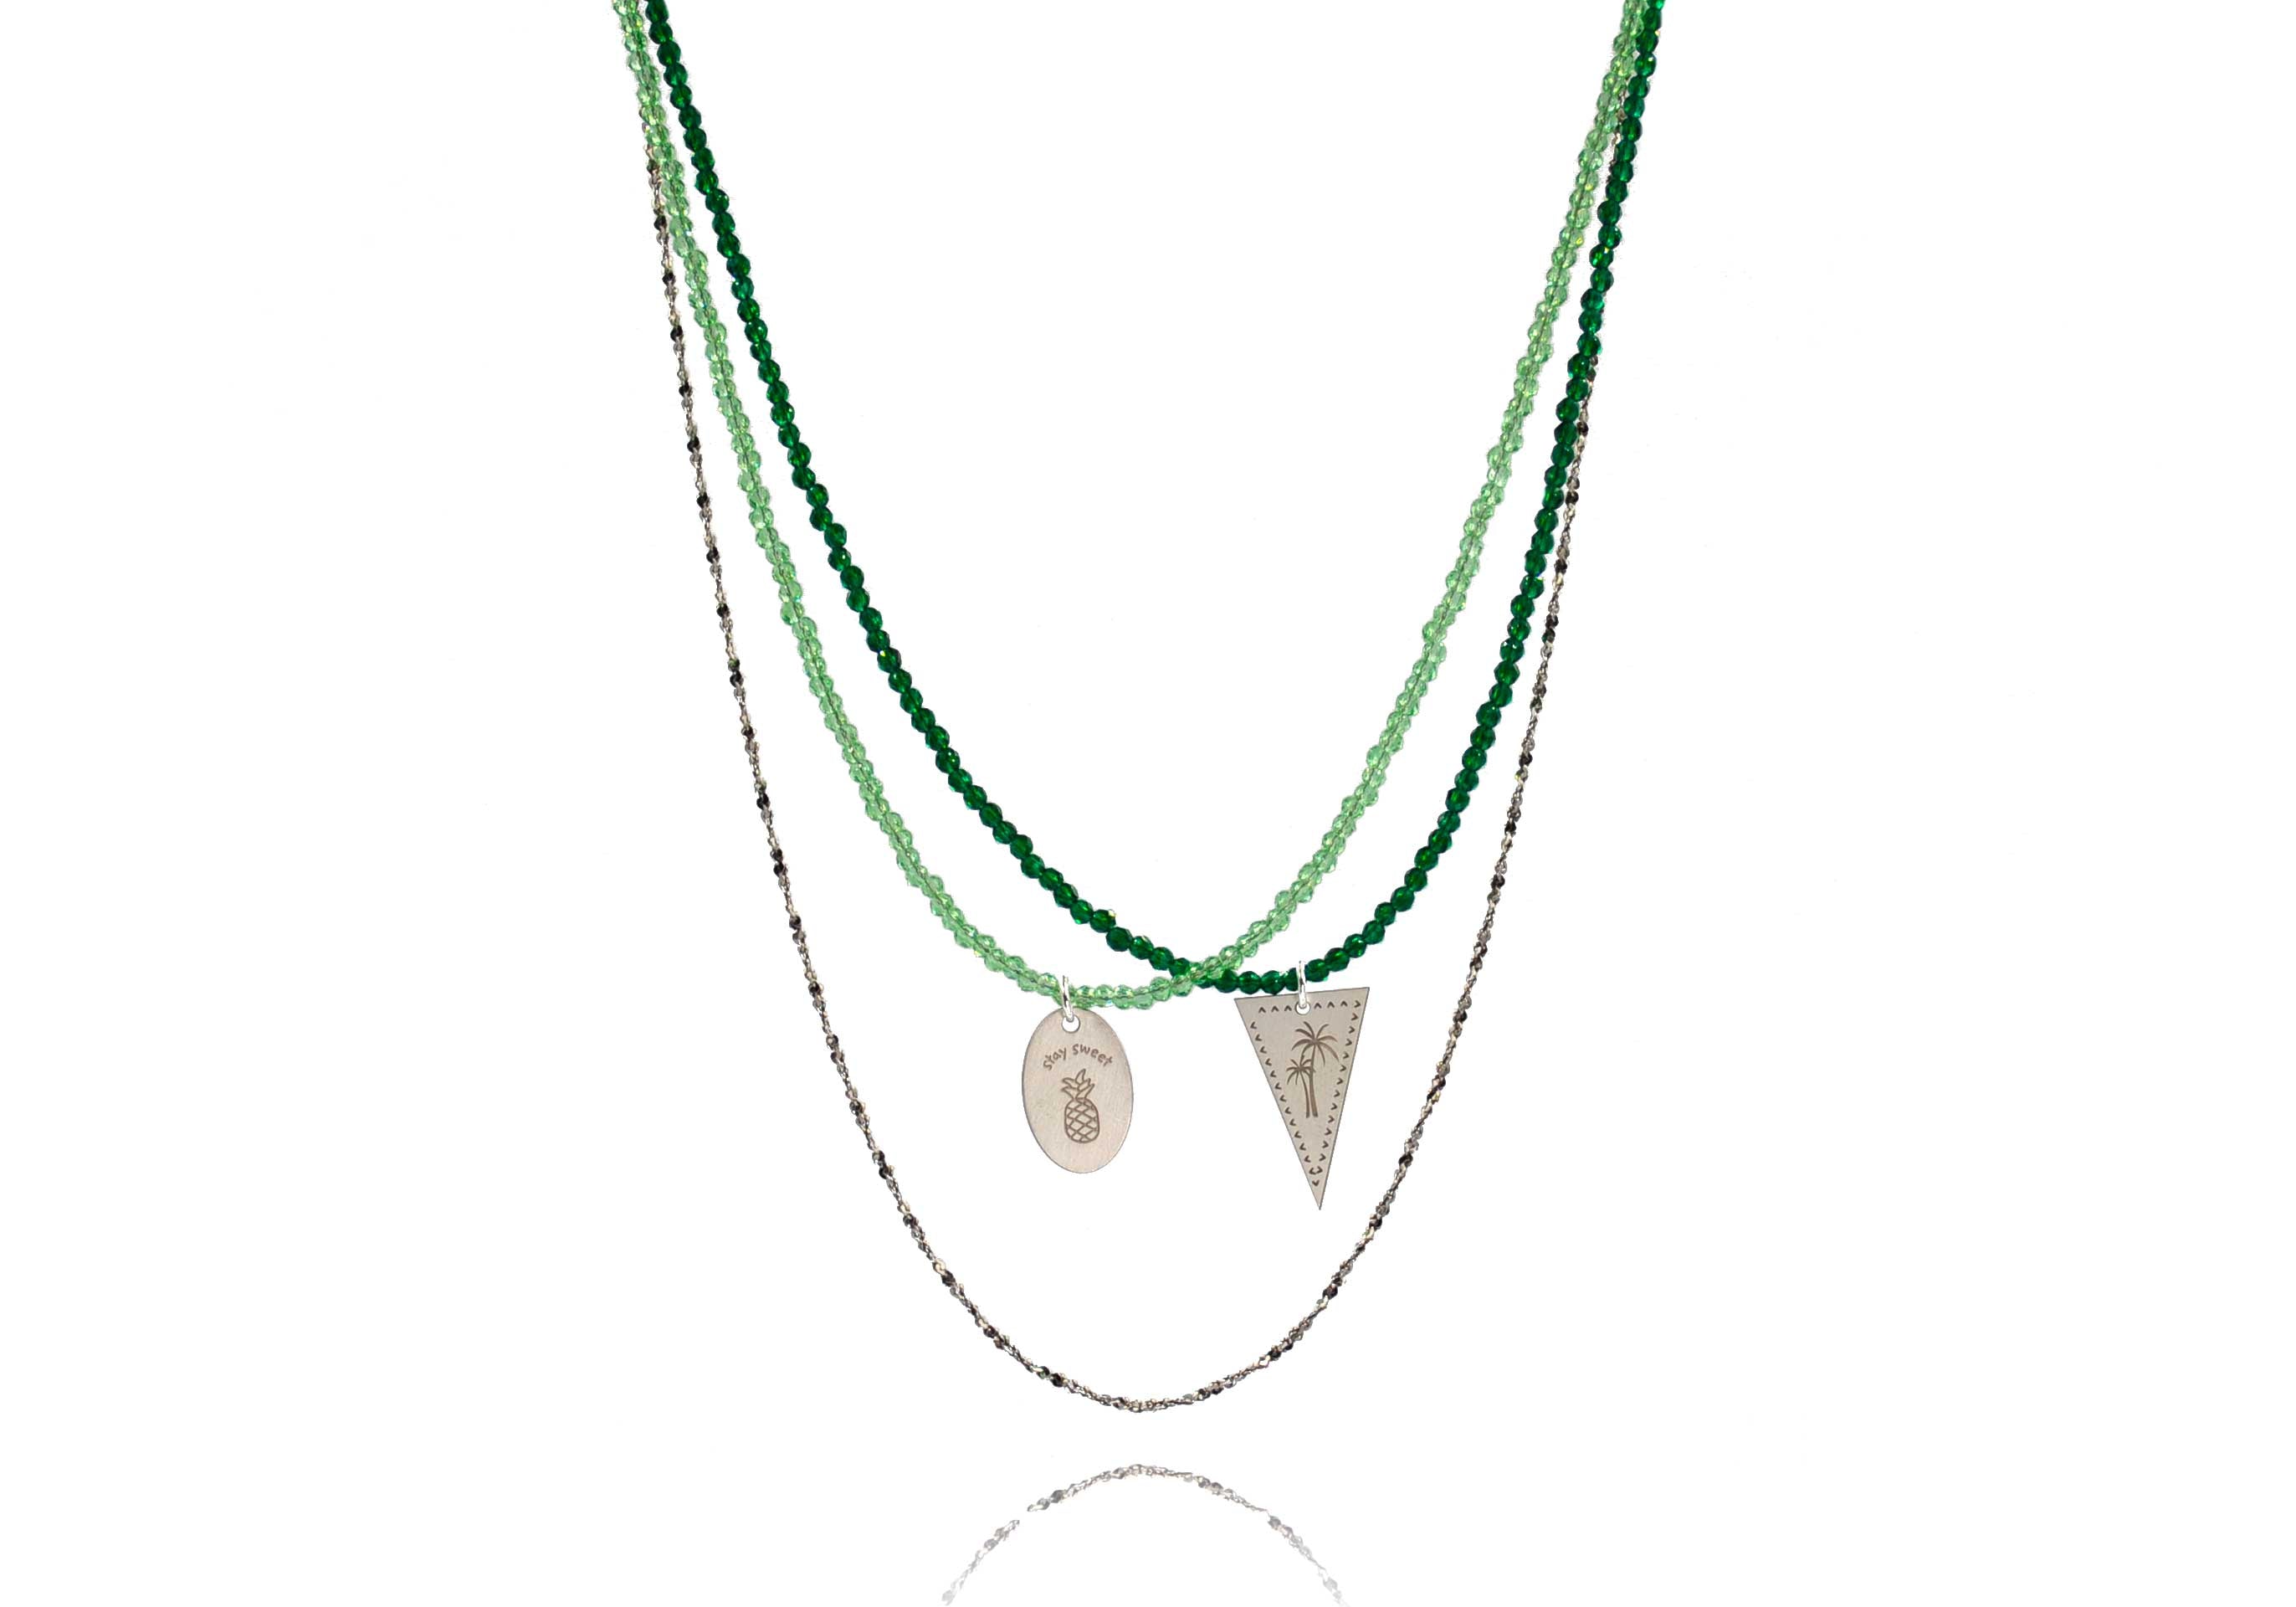 A combo of 3 different necklaces in green tones with crystals, semiprecious stones, silver 925 chain, combined with silver 925 charms in various shapes and with different desings - palm tree, pineapple  - and messages like ´´stay sweet´´.